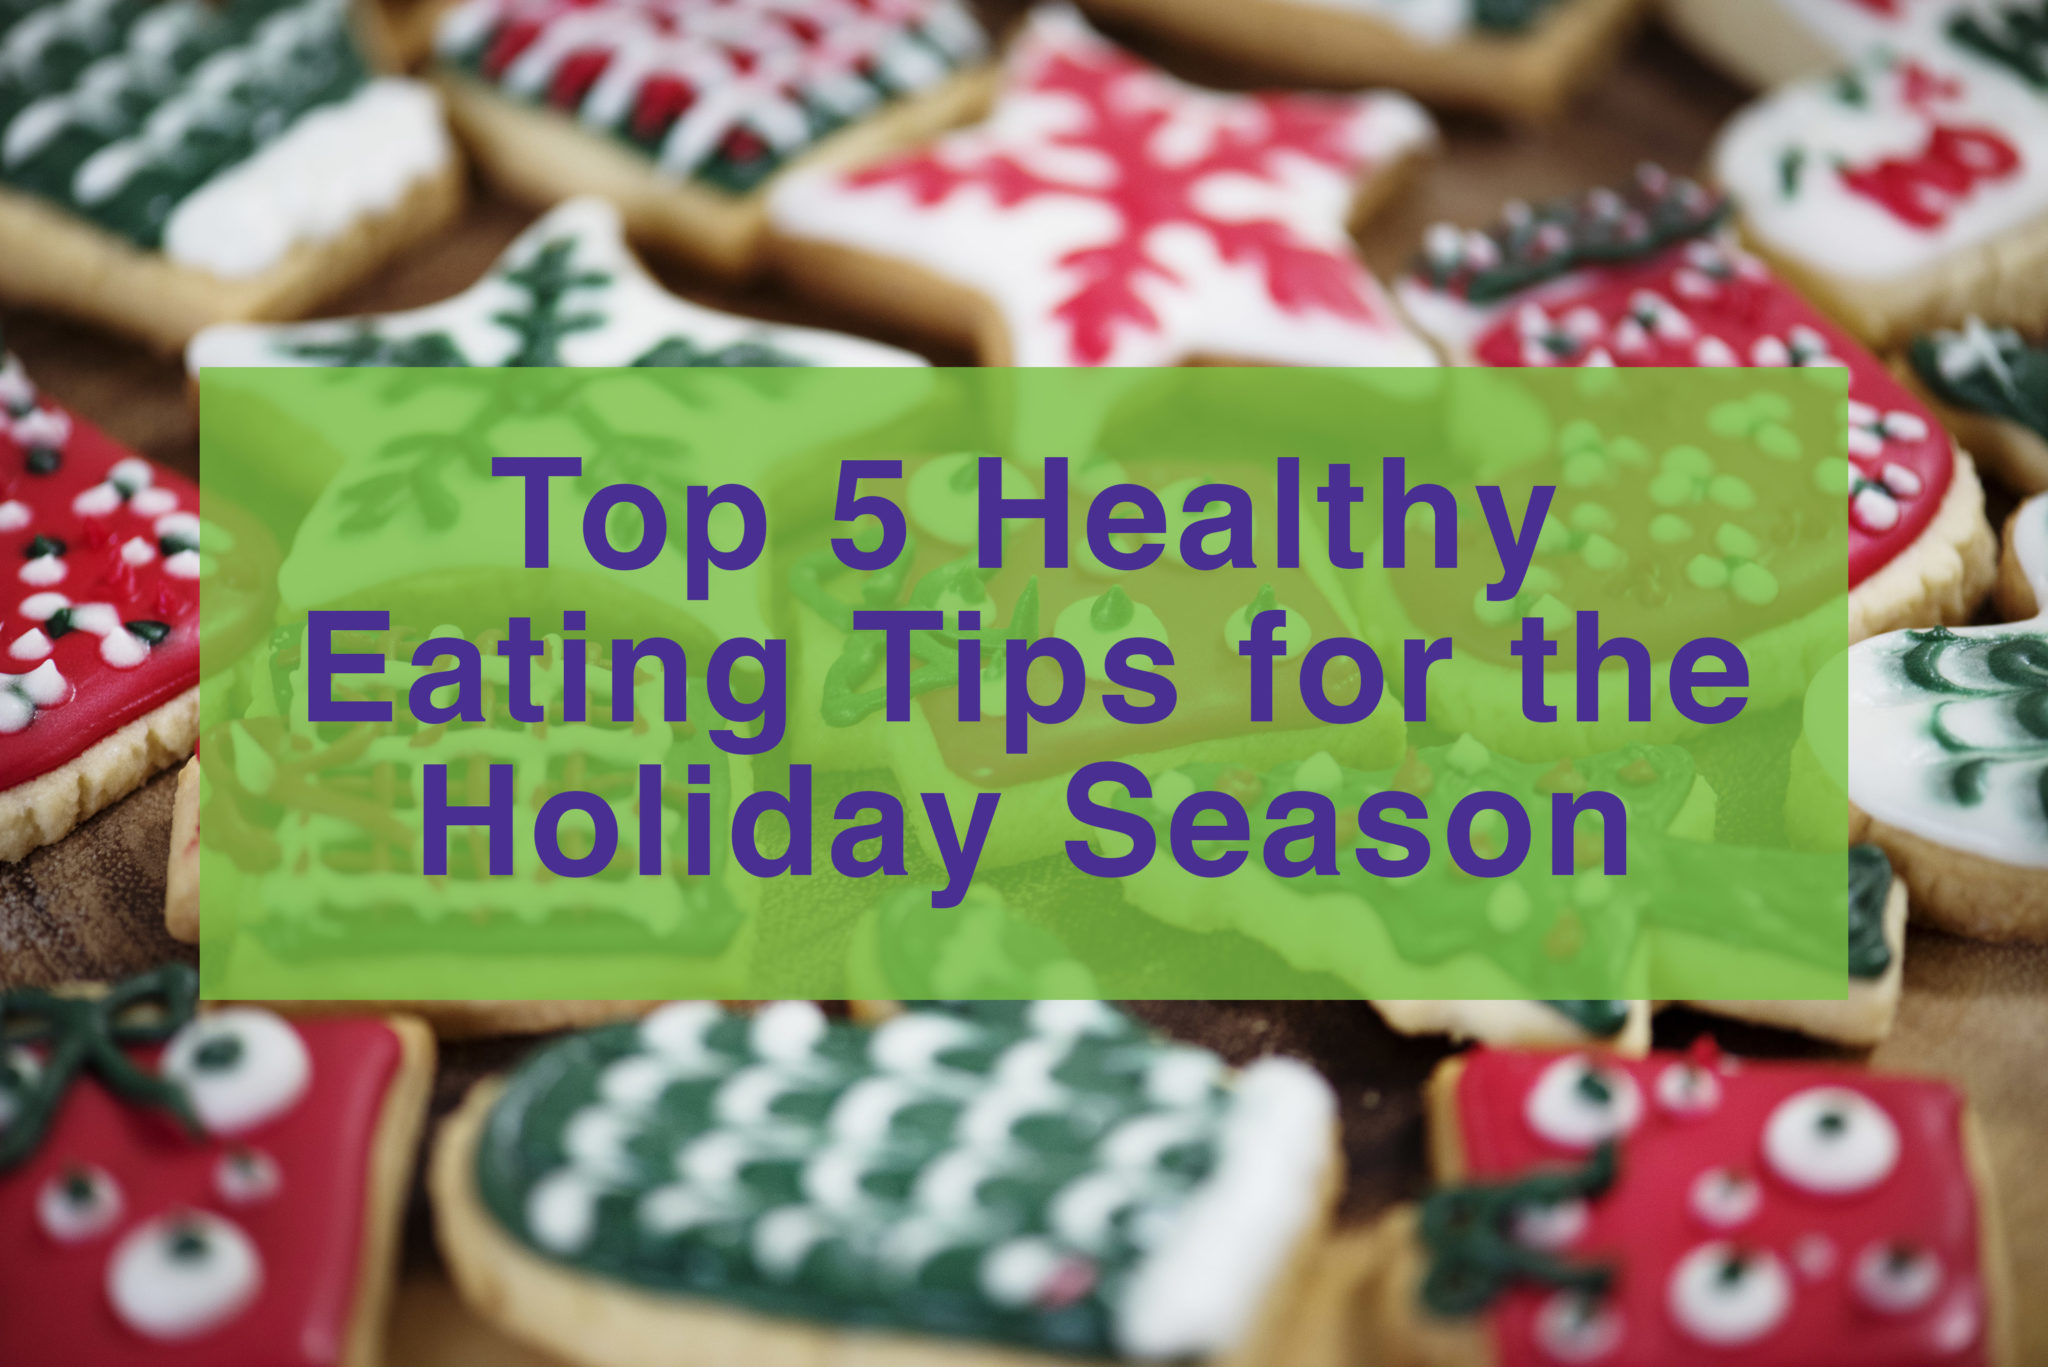 Top 5 Healthy Eating Tips for the Holiday Season